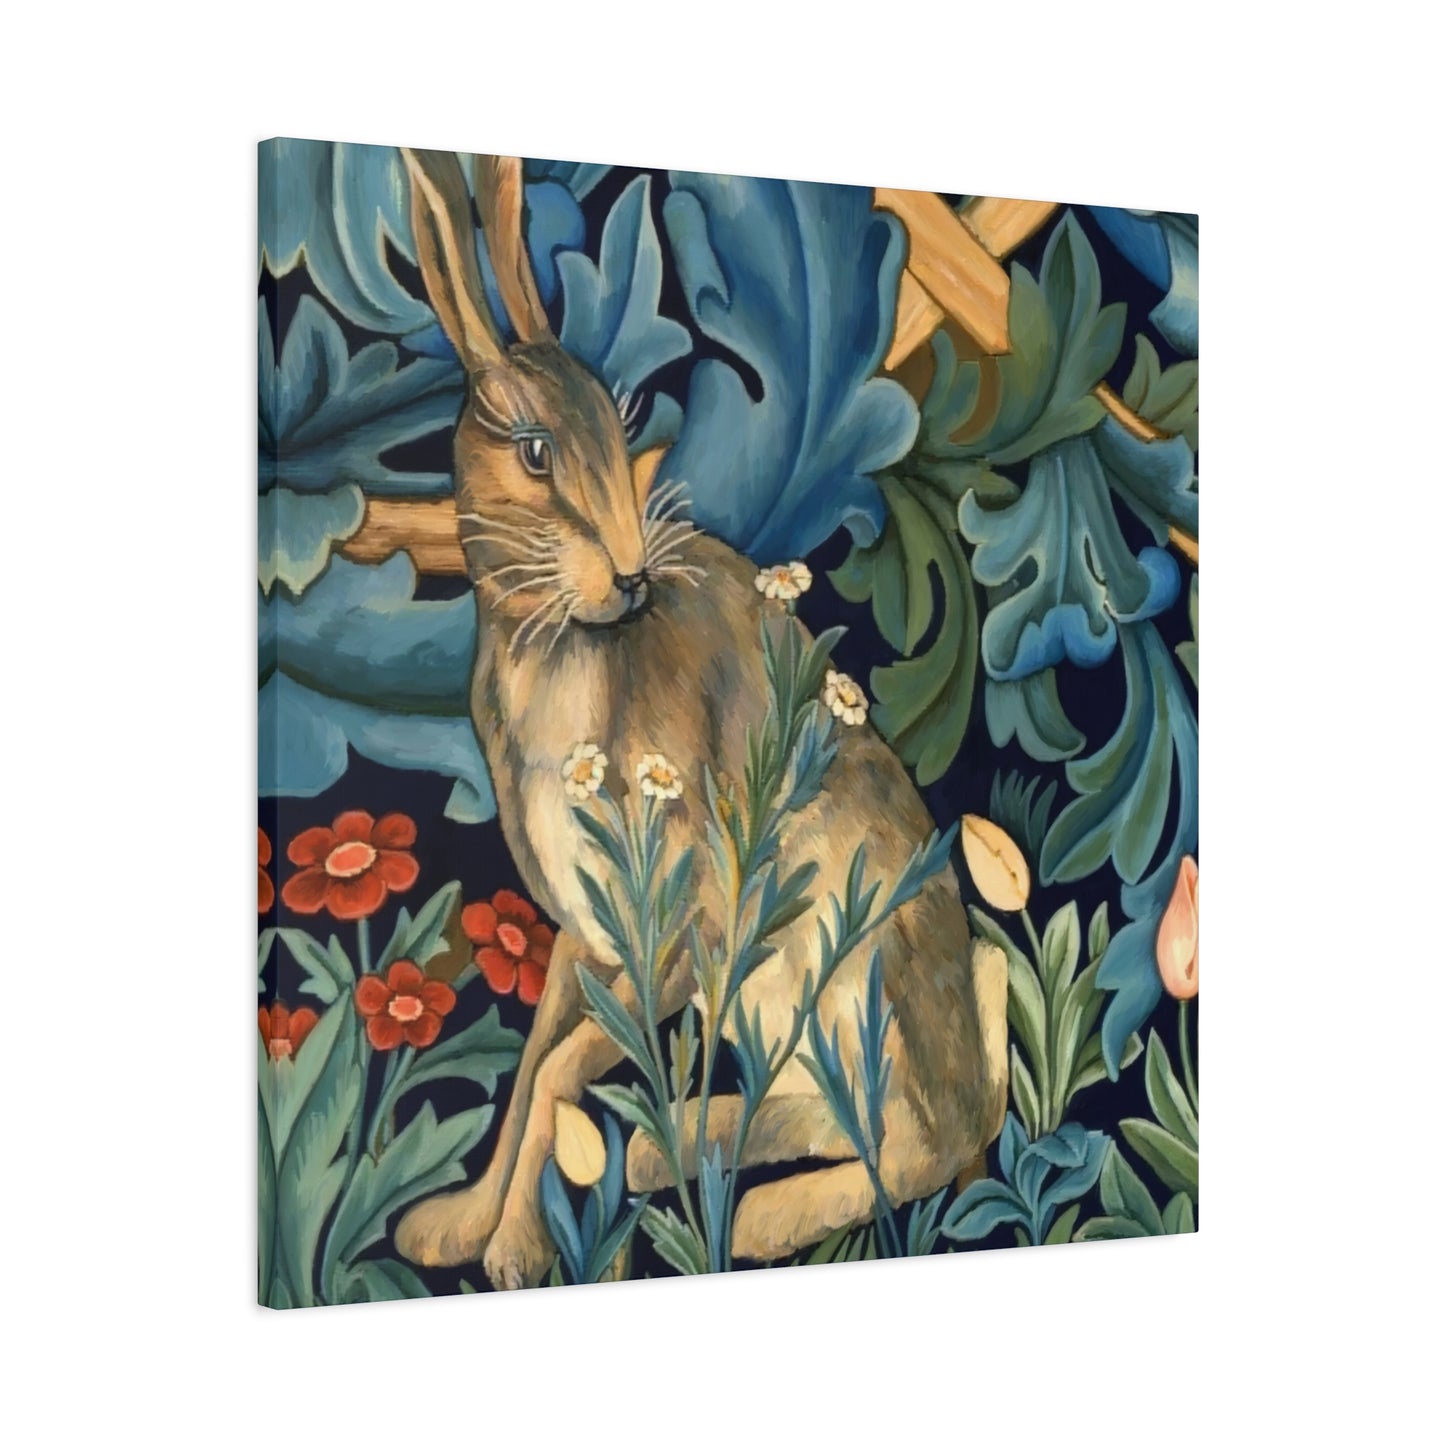 Matte Canvas, Stretched, 1.25" - William Morris Inspired Forest Rabbit